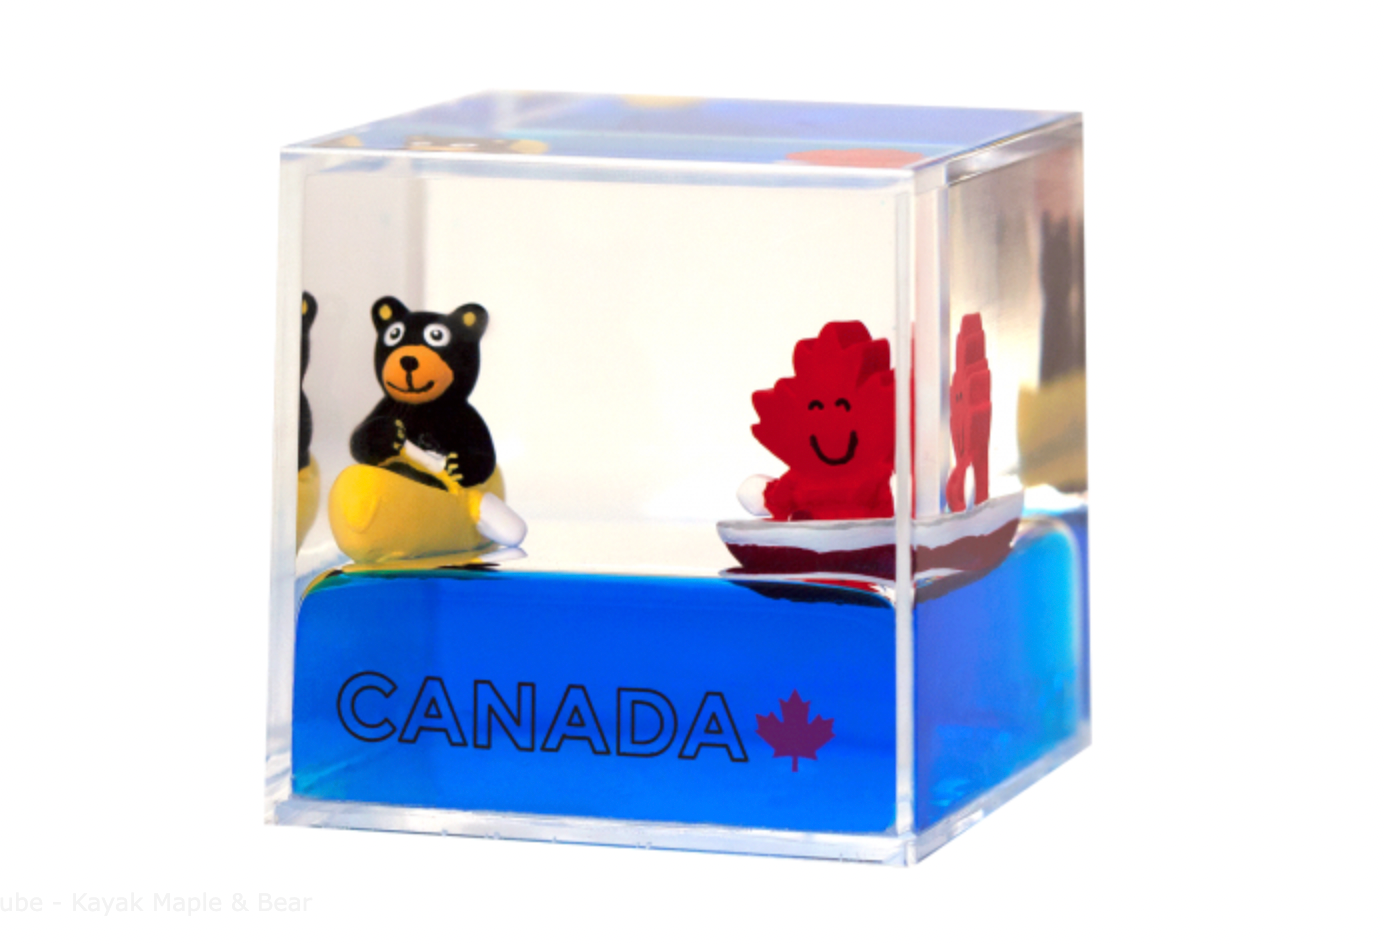 A floating cube with a stylish kayak design featuring a beautiful maple and bear motif